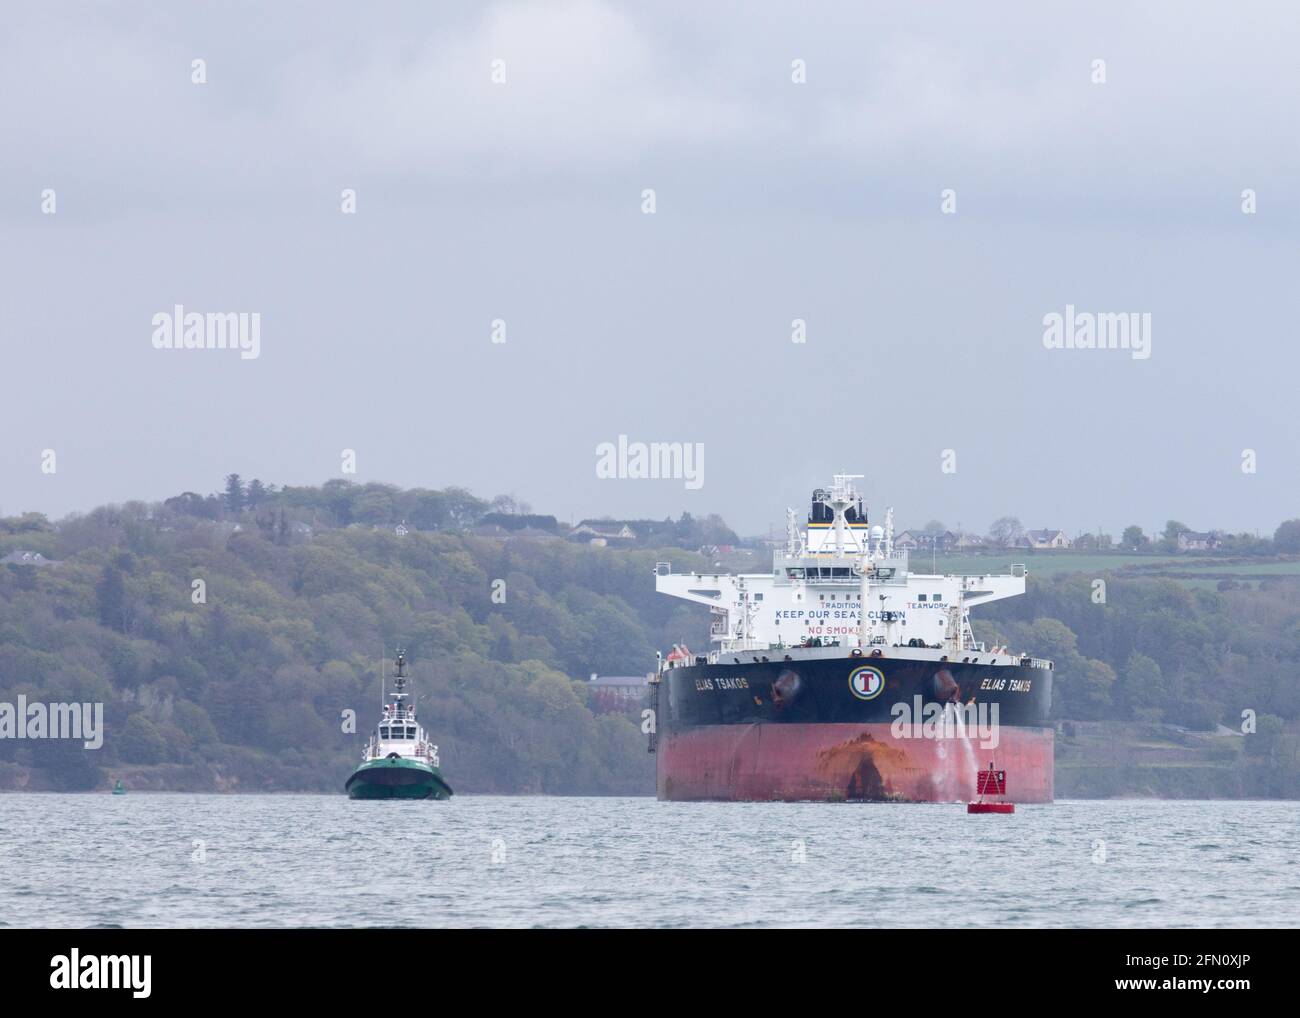 Whitegate, Cork, Ireland. 12th May, 2021. Oil tanker Elias Tsakos is assisted by tugboats Titan and Alex as she slowly manoeuvres away from the jetty and departs the harour on her way to Scapa Flow at Whitegate, Co. Cork, Ireland.  - Credit; David Creedon / Alamy Live News Stock Photo